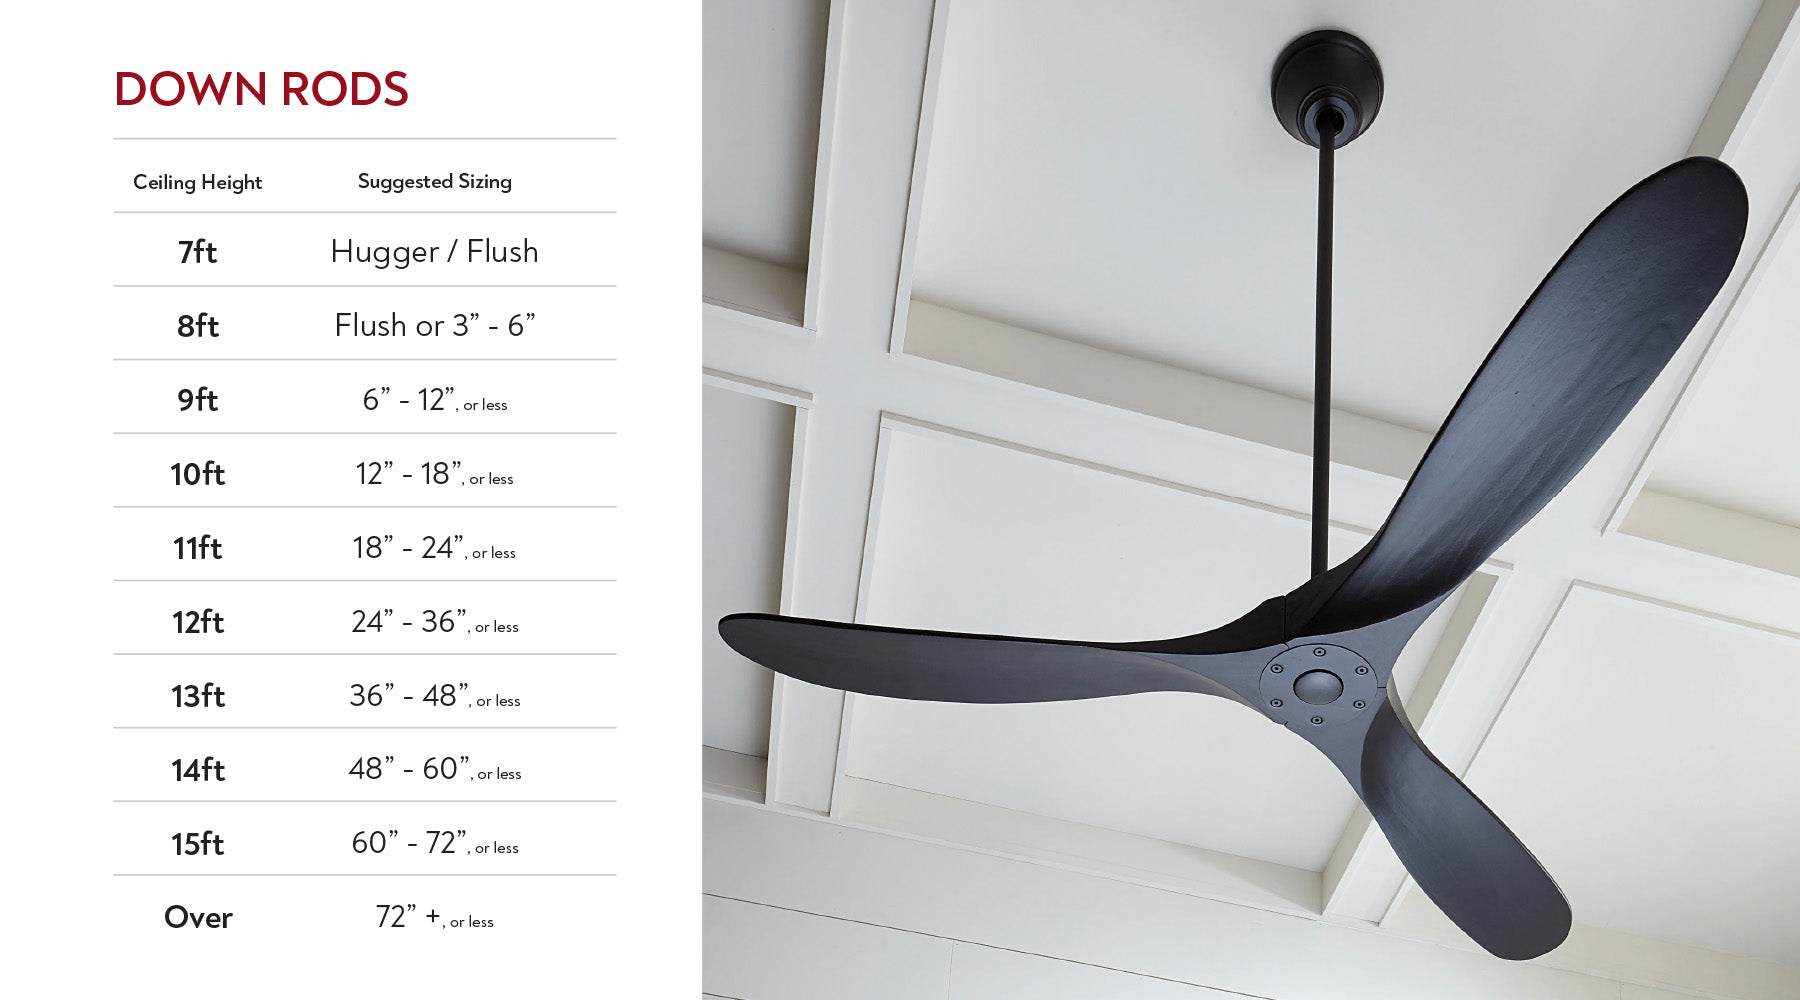 What size or length down rod do I need for my ceiling fan?